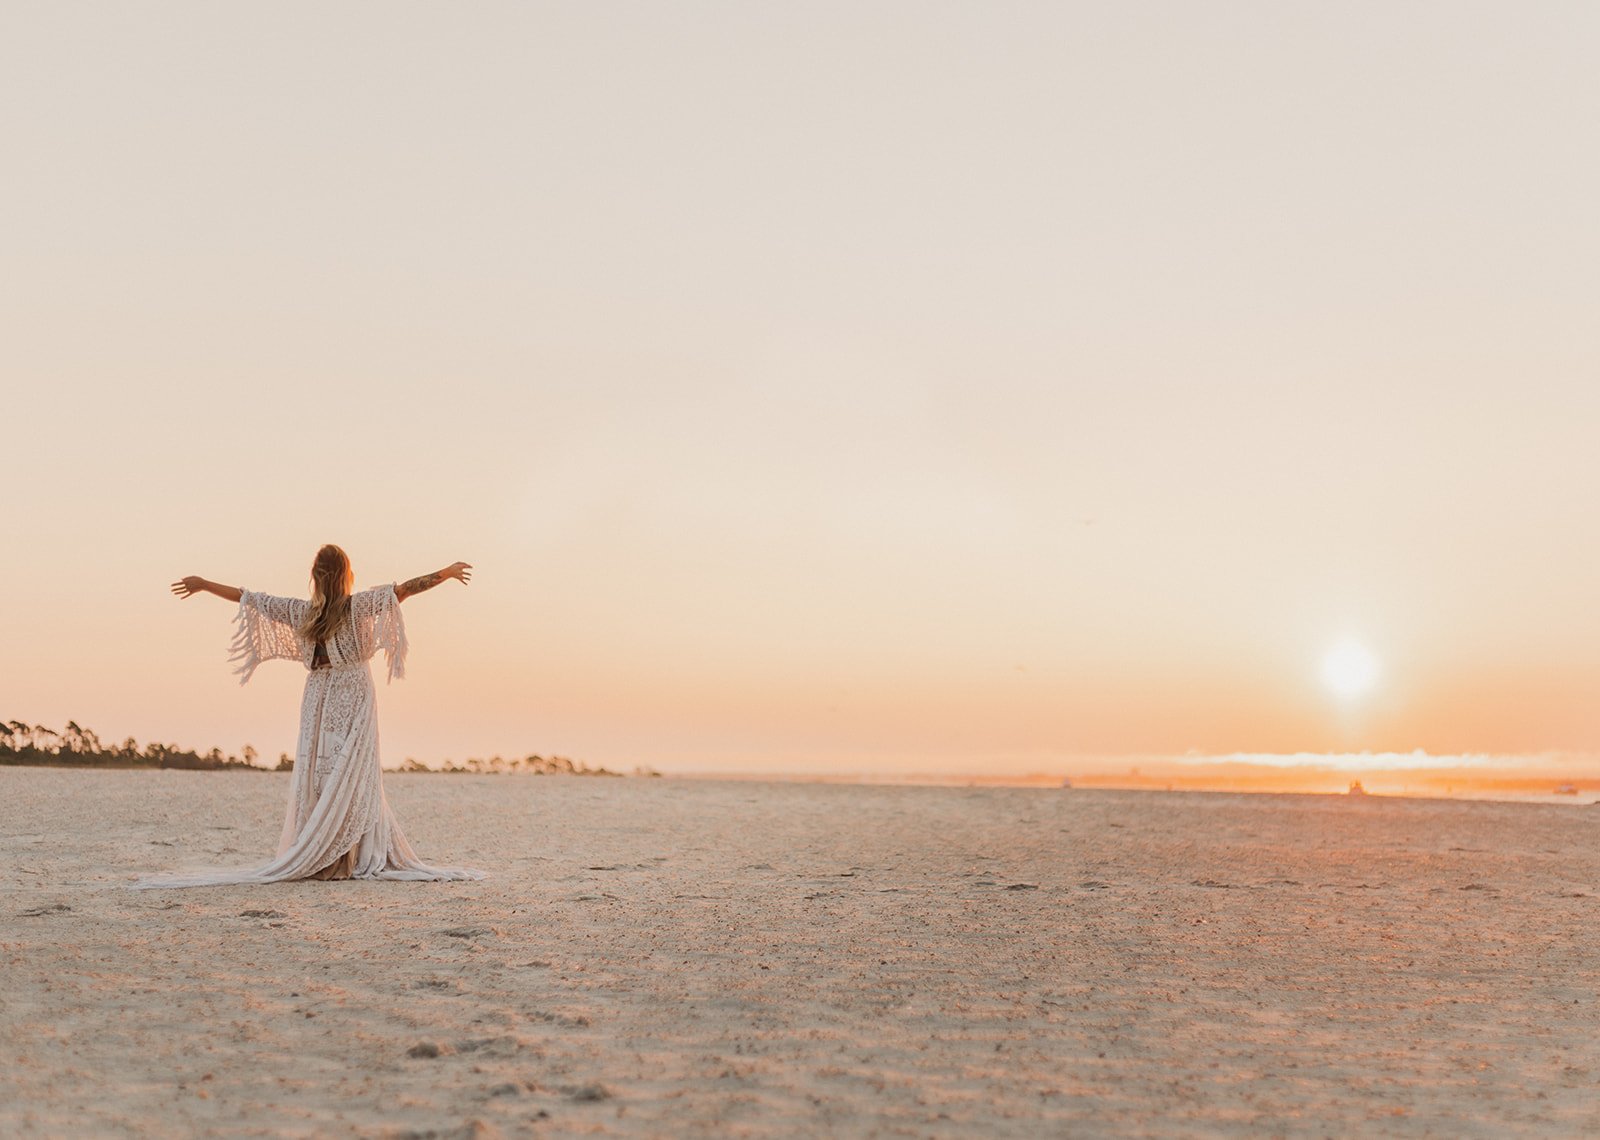 PCB Photographers collab. Girl stands wearing white dress, arms outstretched facing rising sun in st. andrews state park.